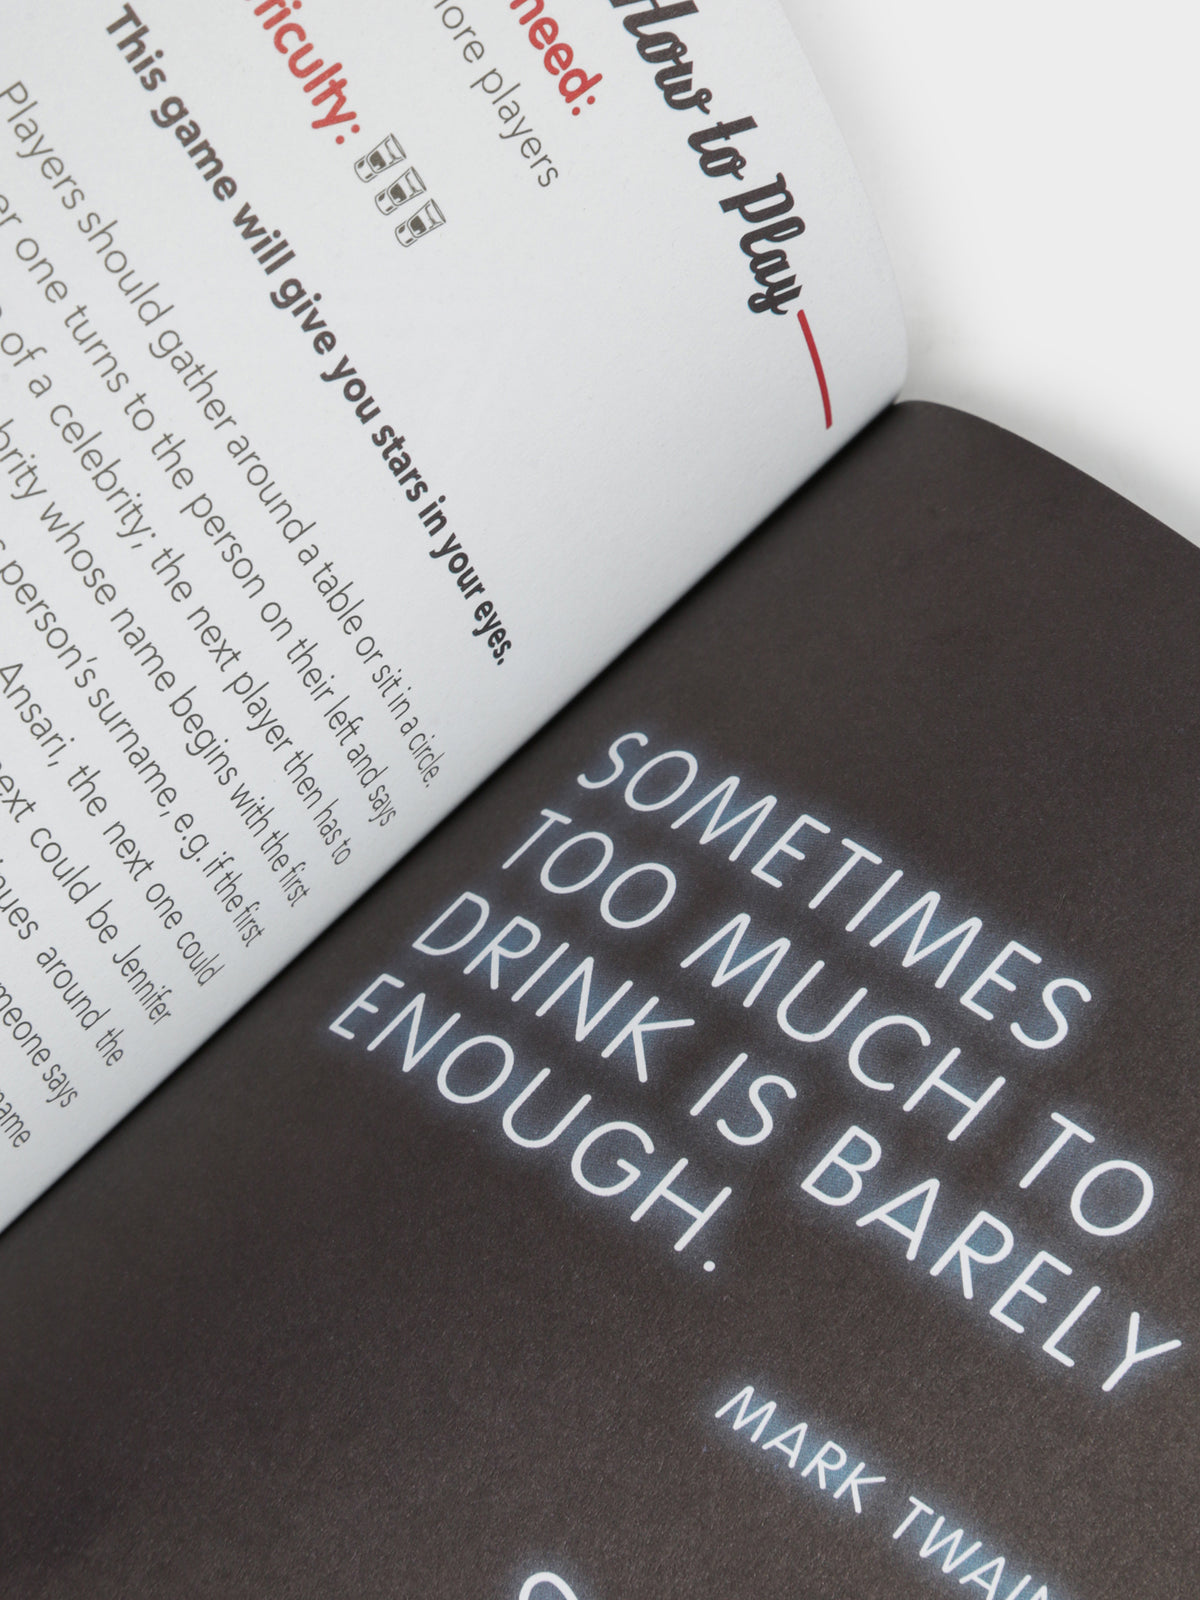 The Little Book Of Drinking Games